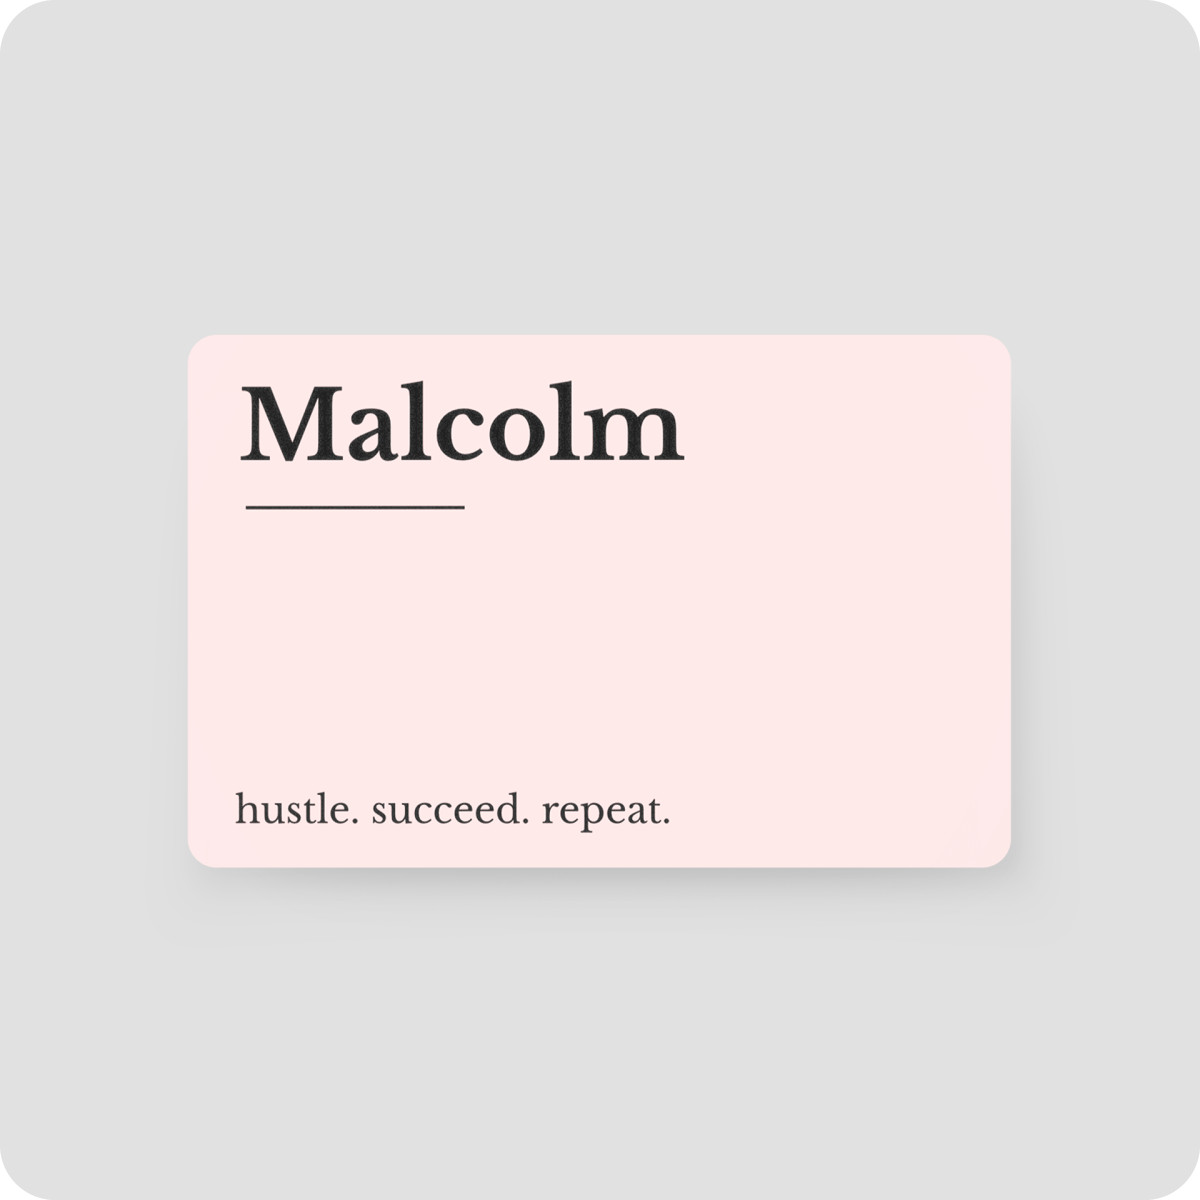 One Good Card: Smart Digital Name Card (Headline) - Personalised Near Field Communication (NFC) Digital Business Cards designs - Baby Pink